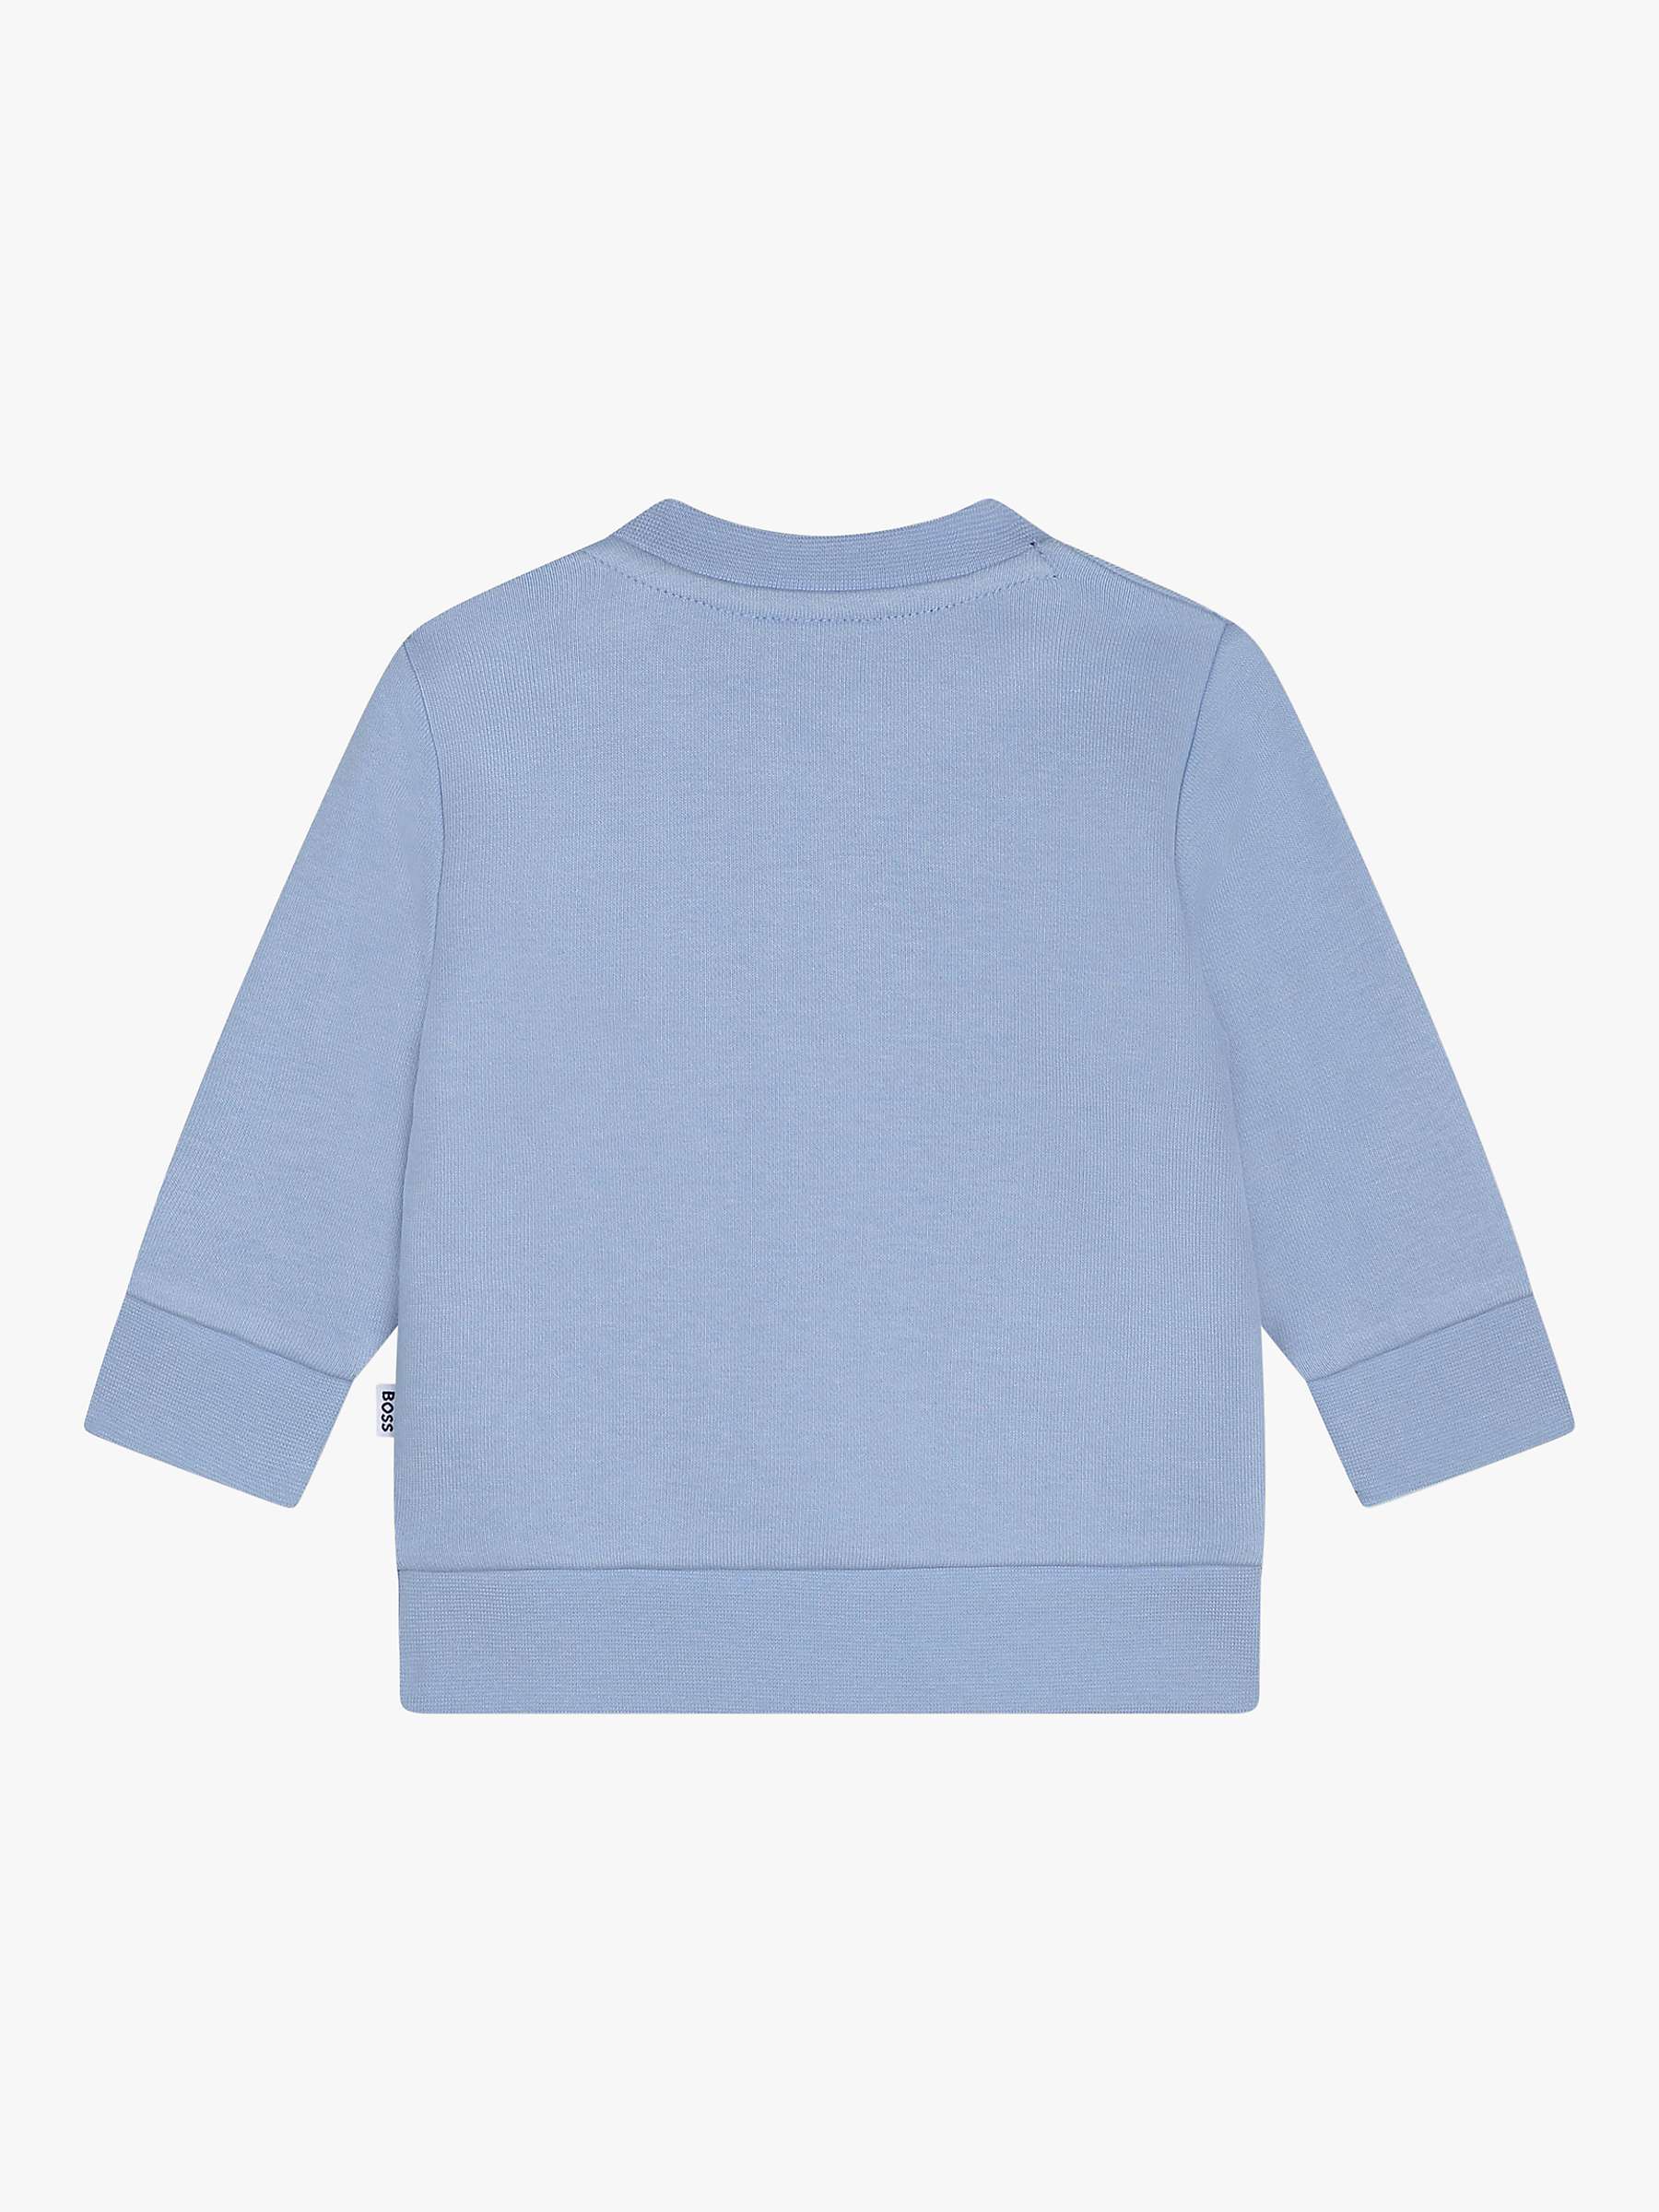 Buy BOSS Baby French Terry Jumper, Blue Online at johnlewis.com